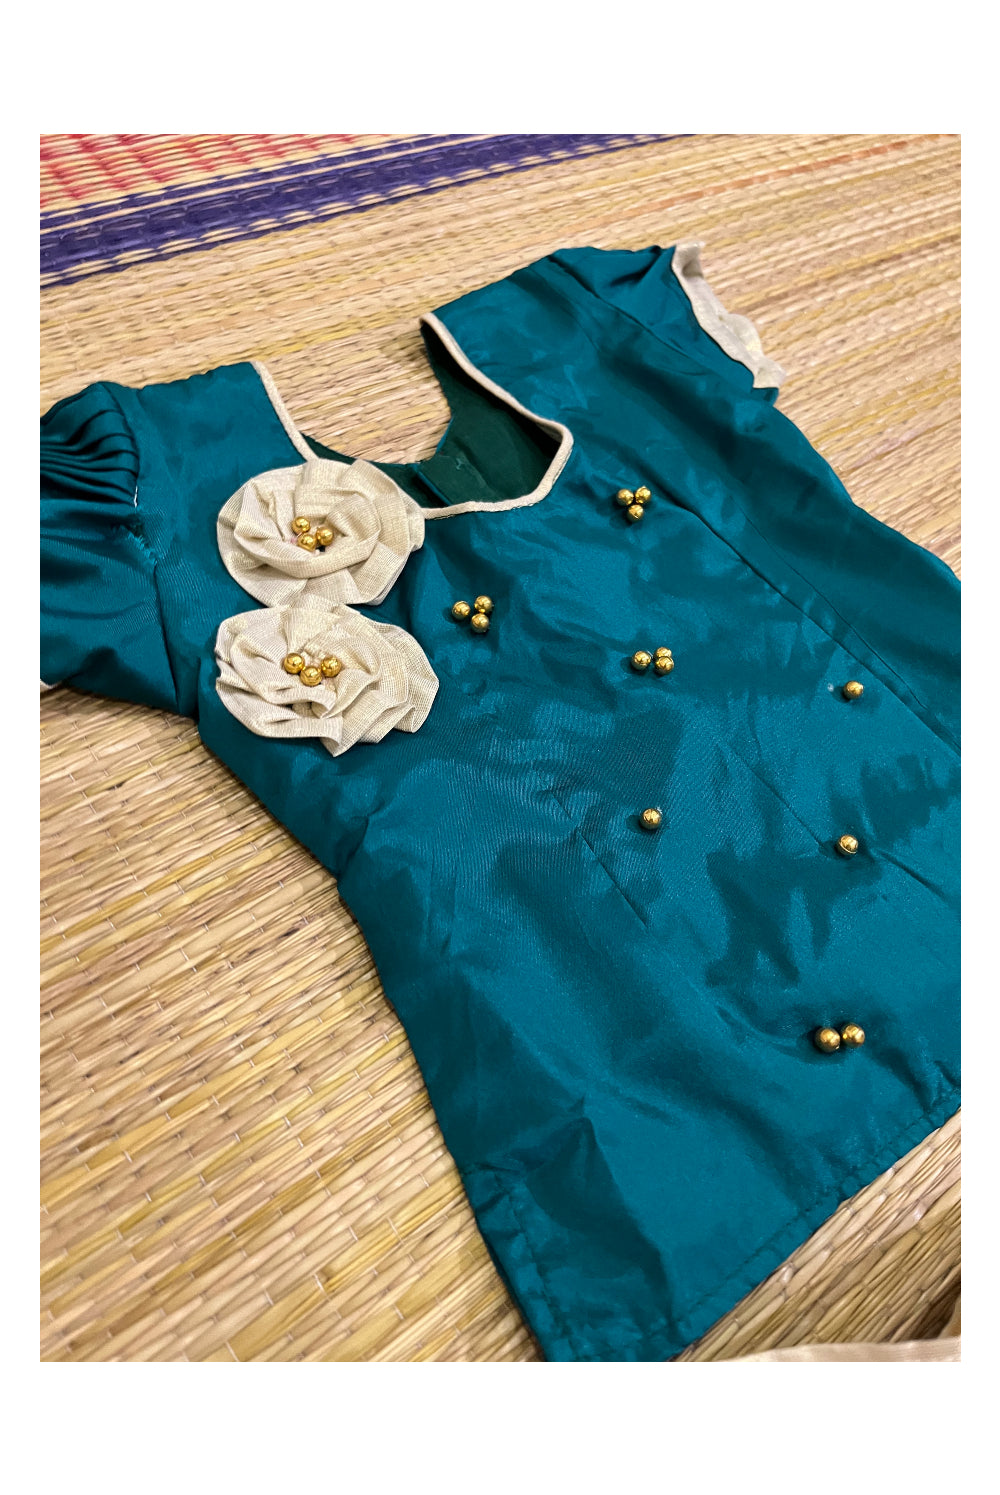 Southloom Kerala Green Pavada Blouse with Bead Work for Kids (Age 1 - 10)